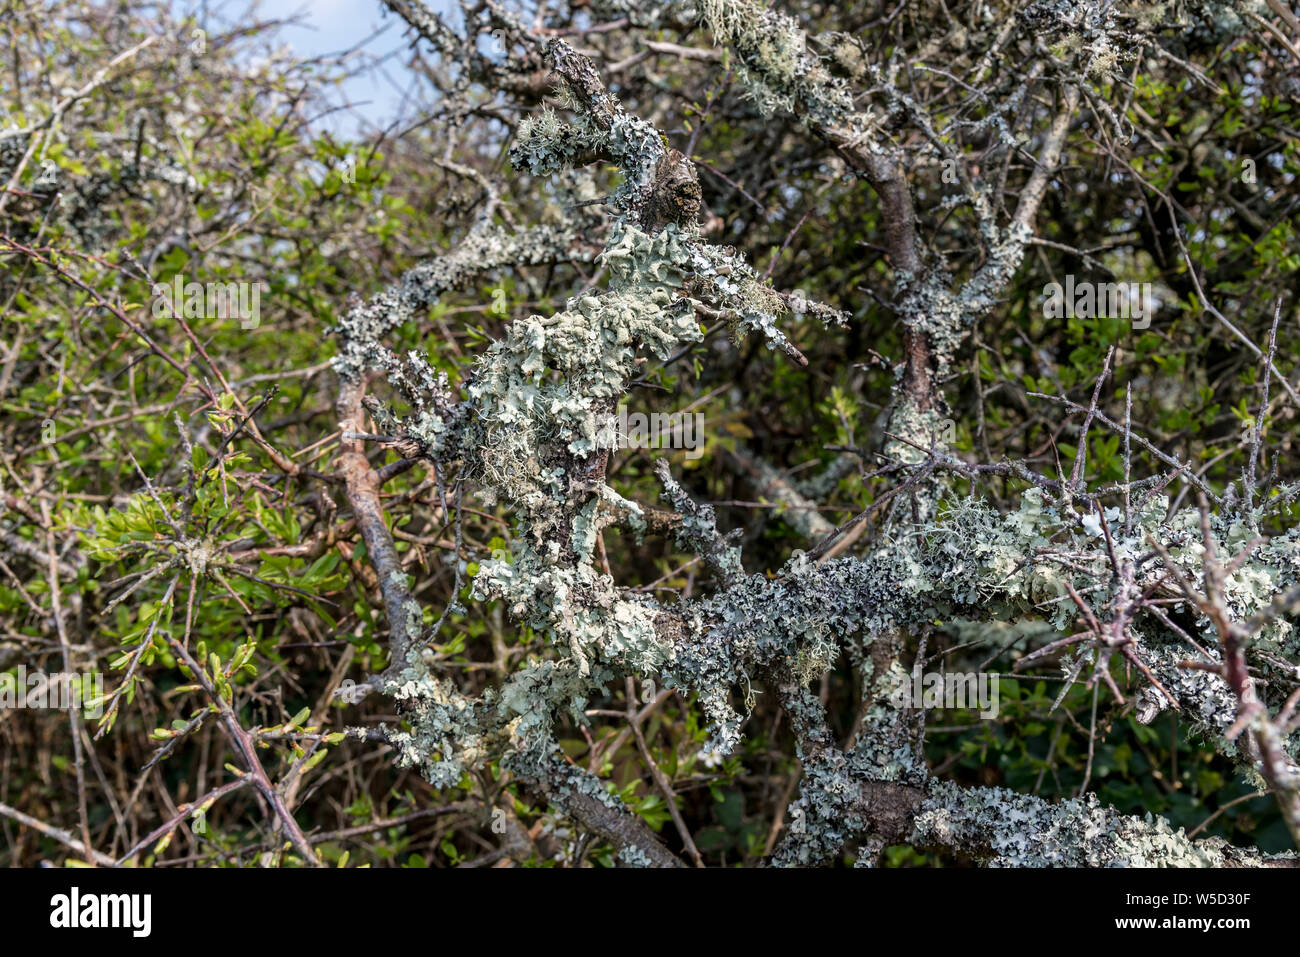 Dense fruticose and foliose lichens growing on a hawthorn hedge in early Spring Stock Photo